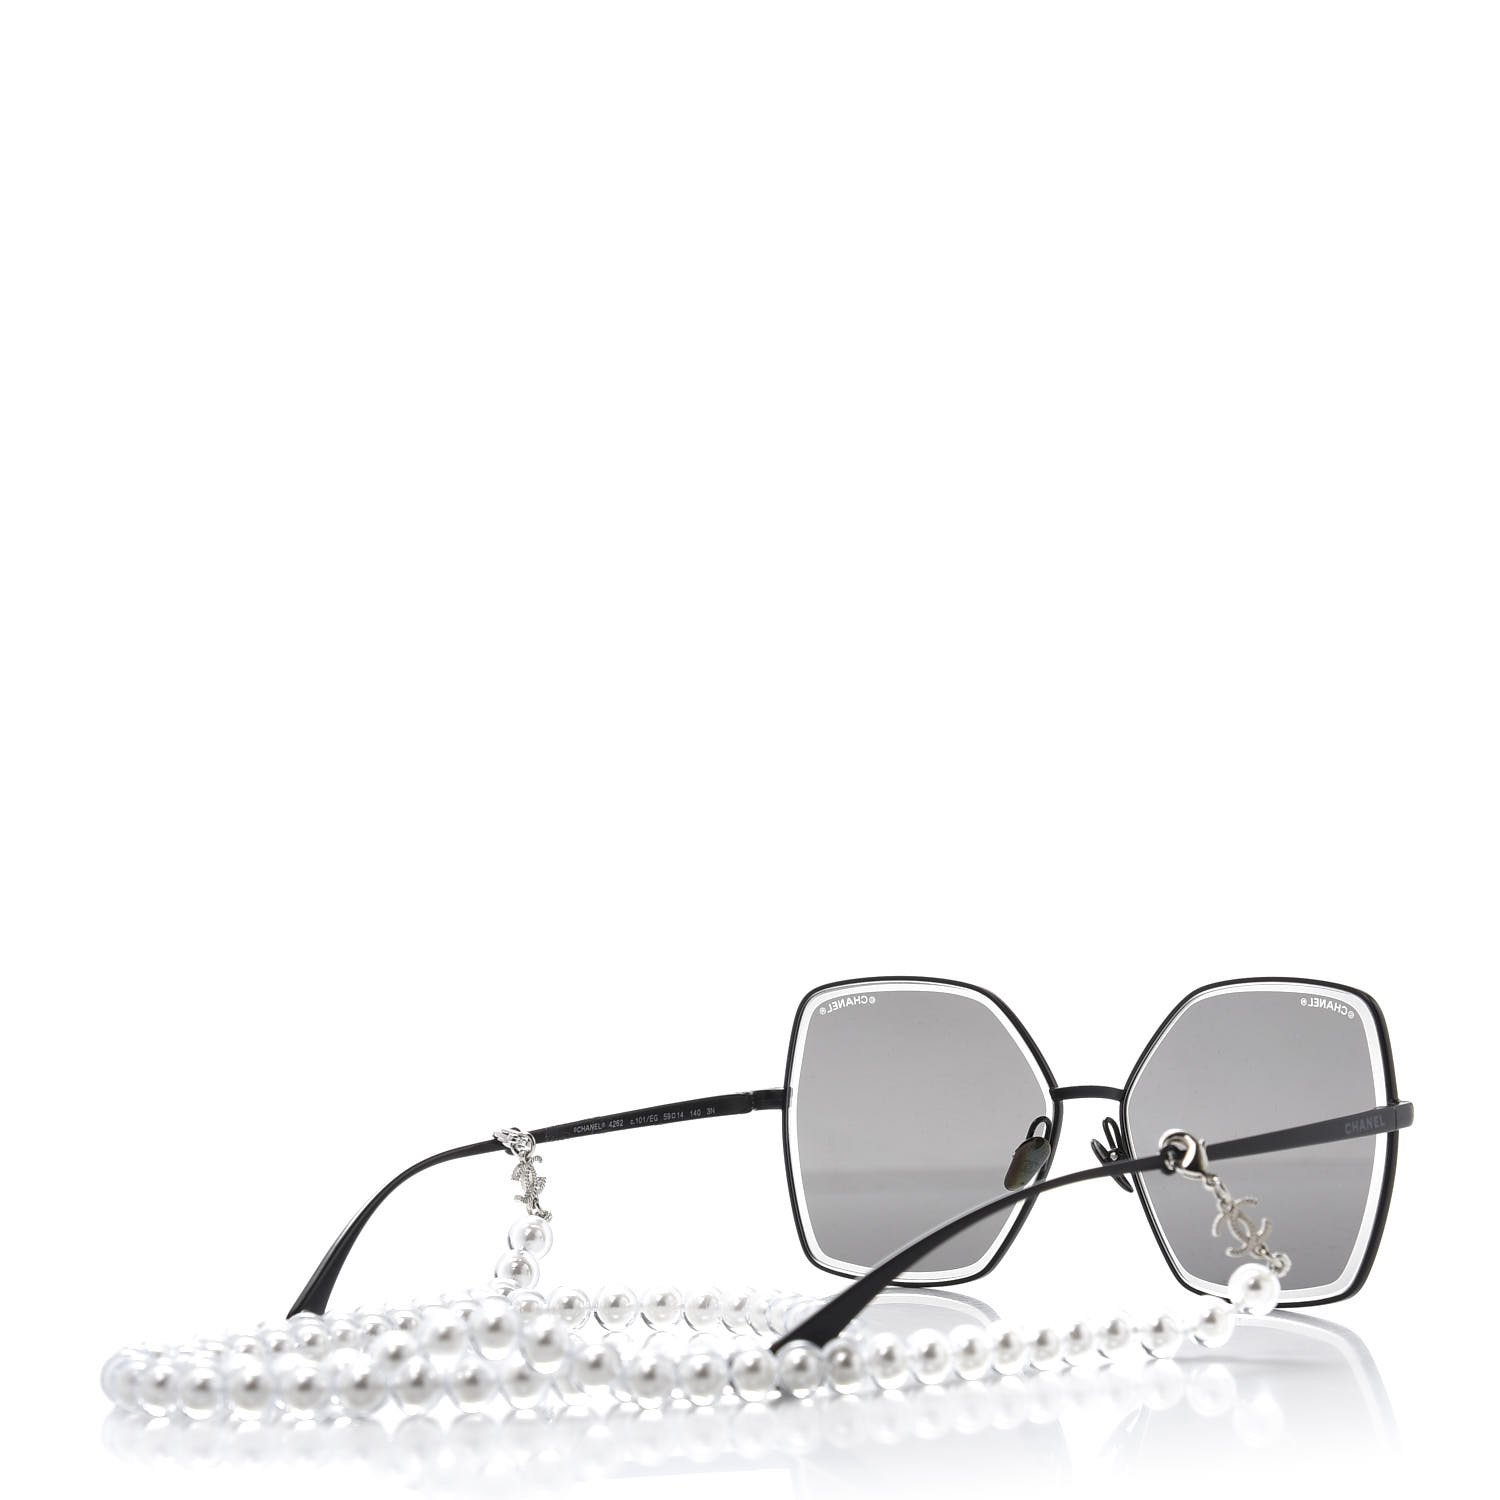 CHANEL Metal Butterfly Removable Pearl Chain Sunglasses 4262 Black ...